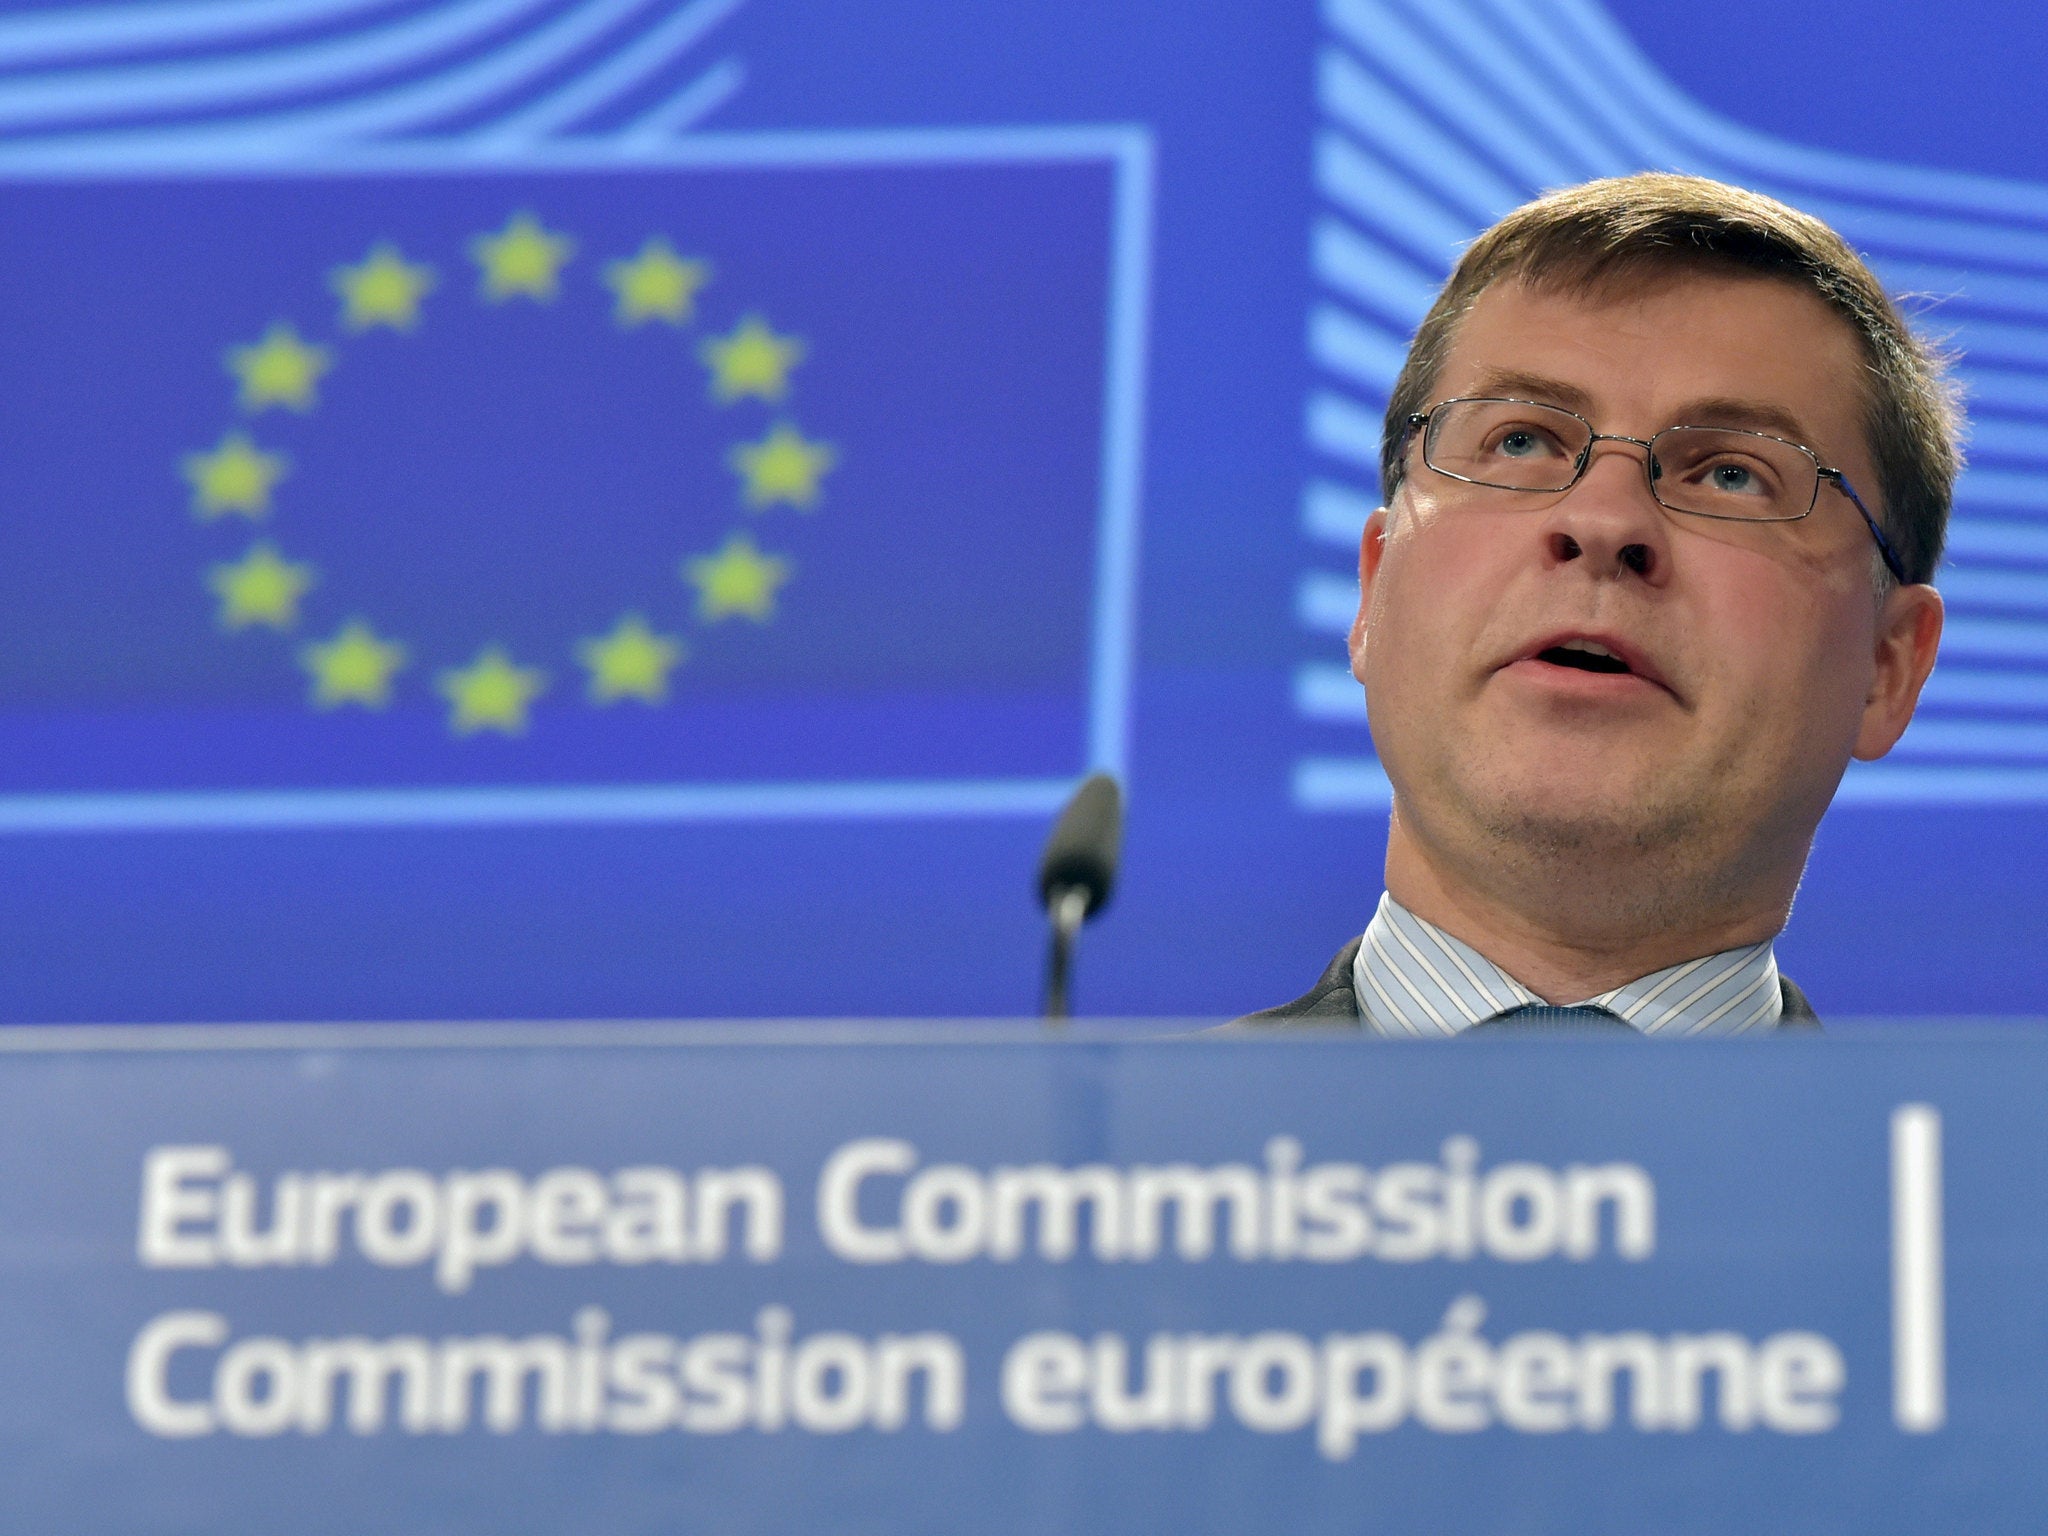 Commissioner for Euro and Social dialogue Valdis Dombrovskis gives a news conference at the EC headquarters in Brussels